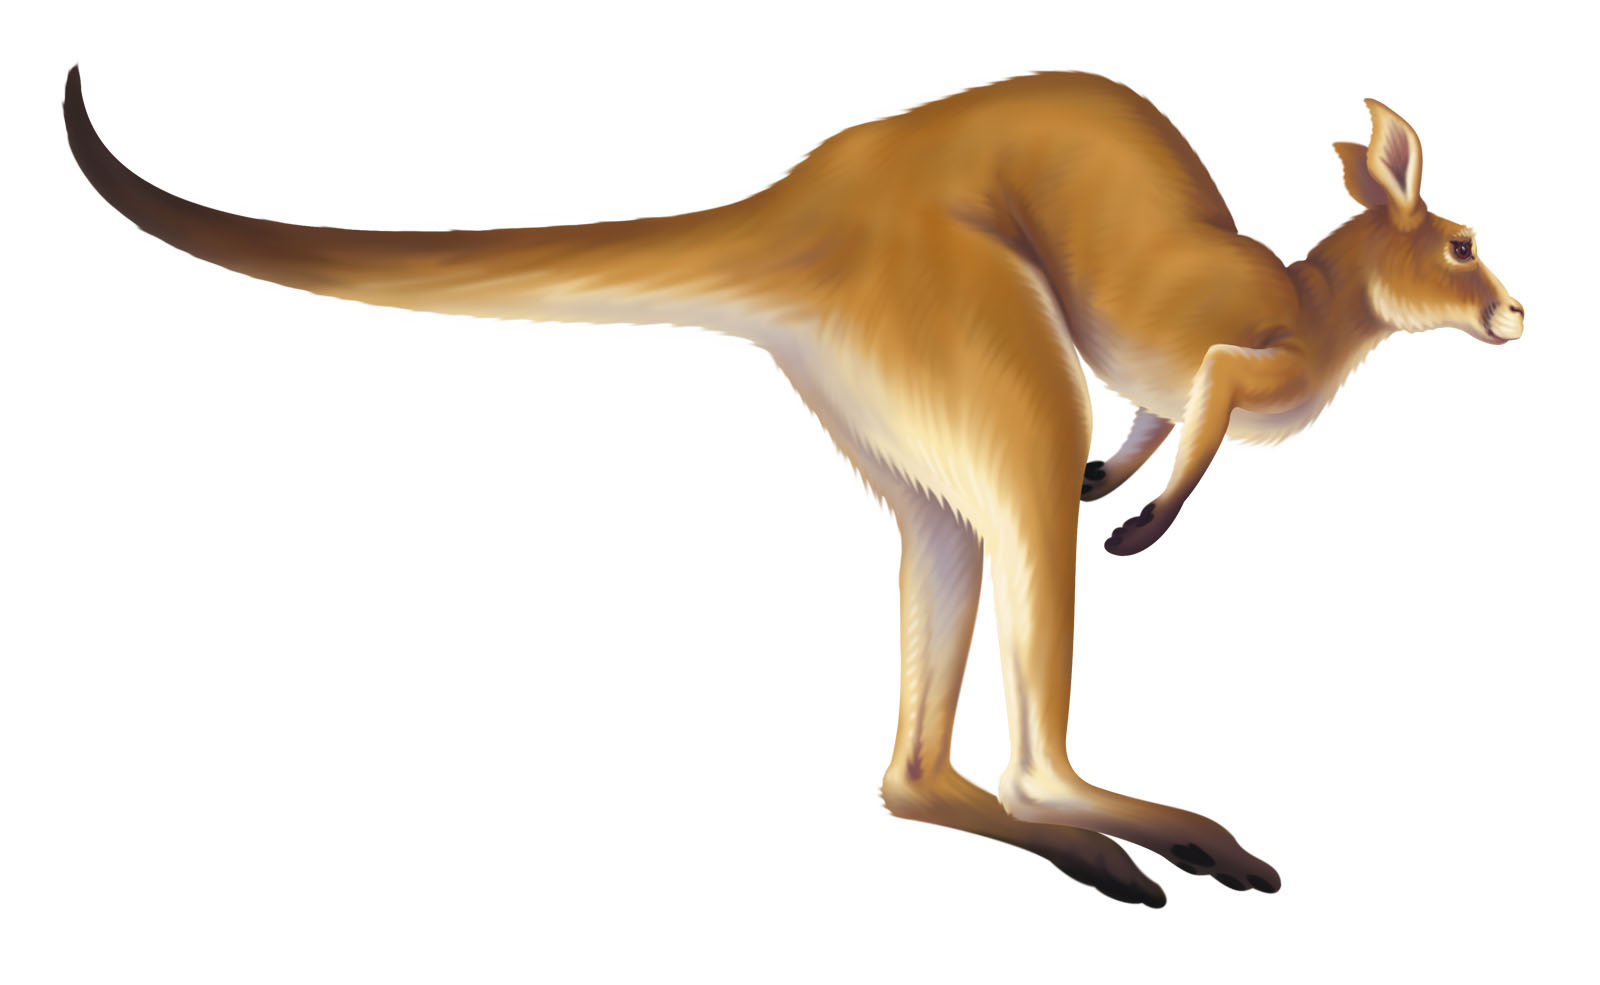 Kangaroo Jumping Images  Pictures - Becuo